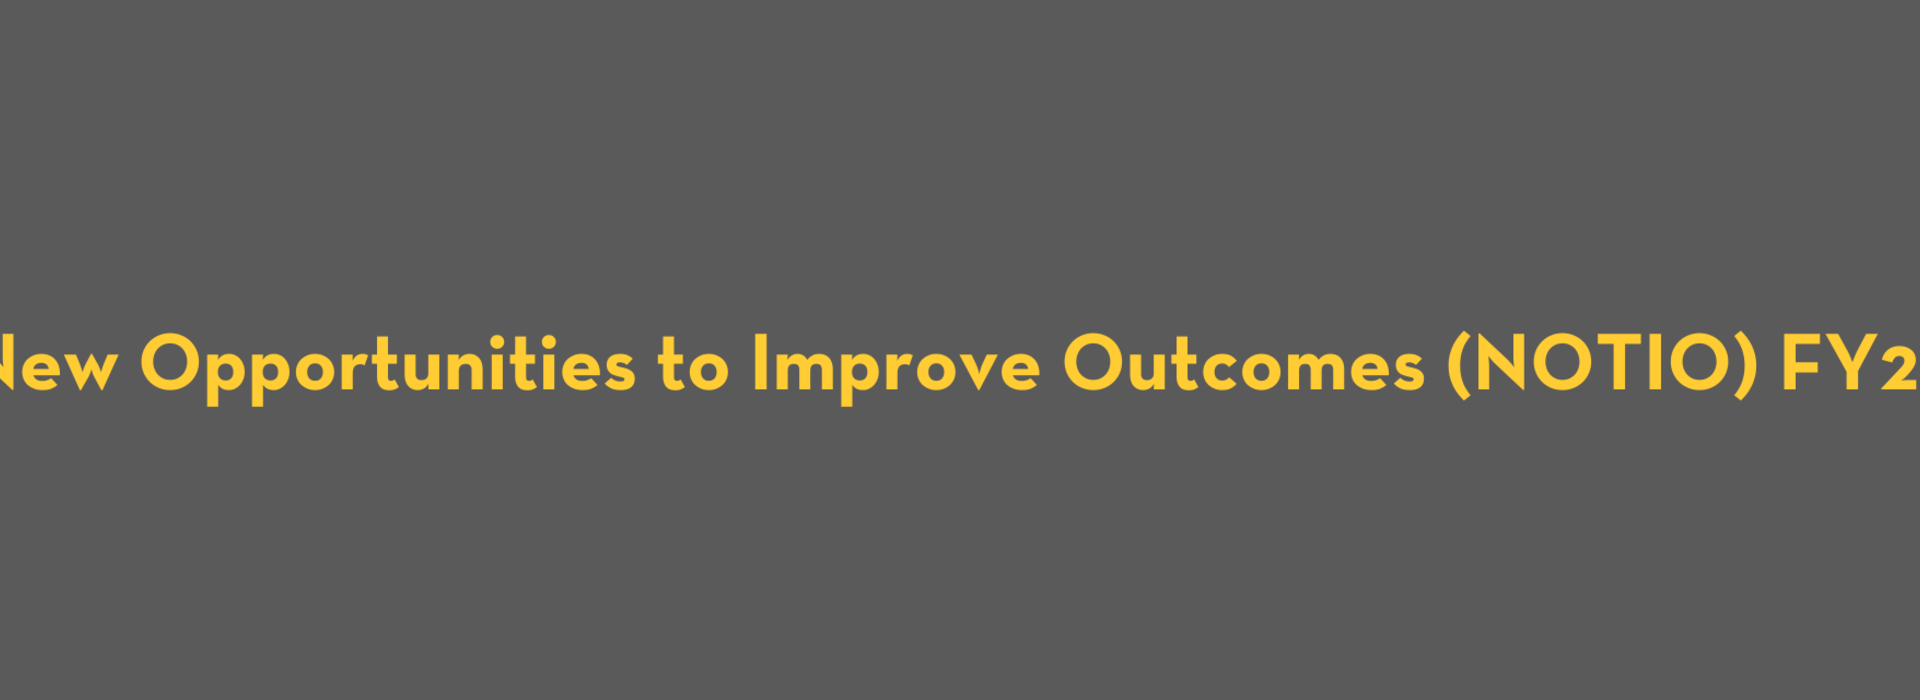 New Opportunities to Improve Outcomes (NOTIO) FY22